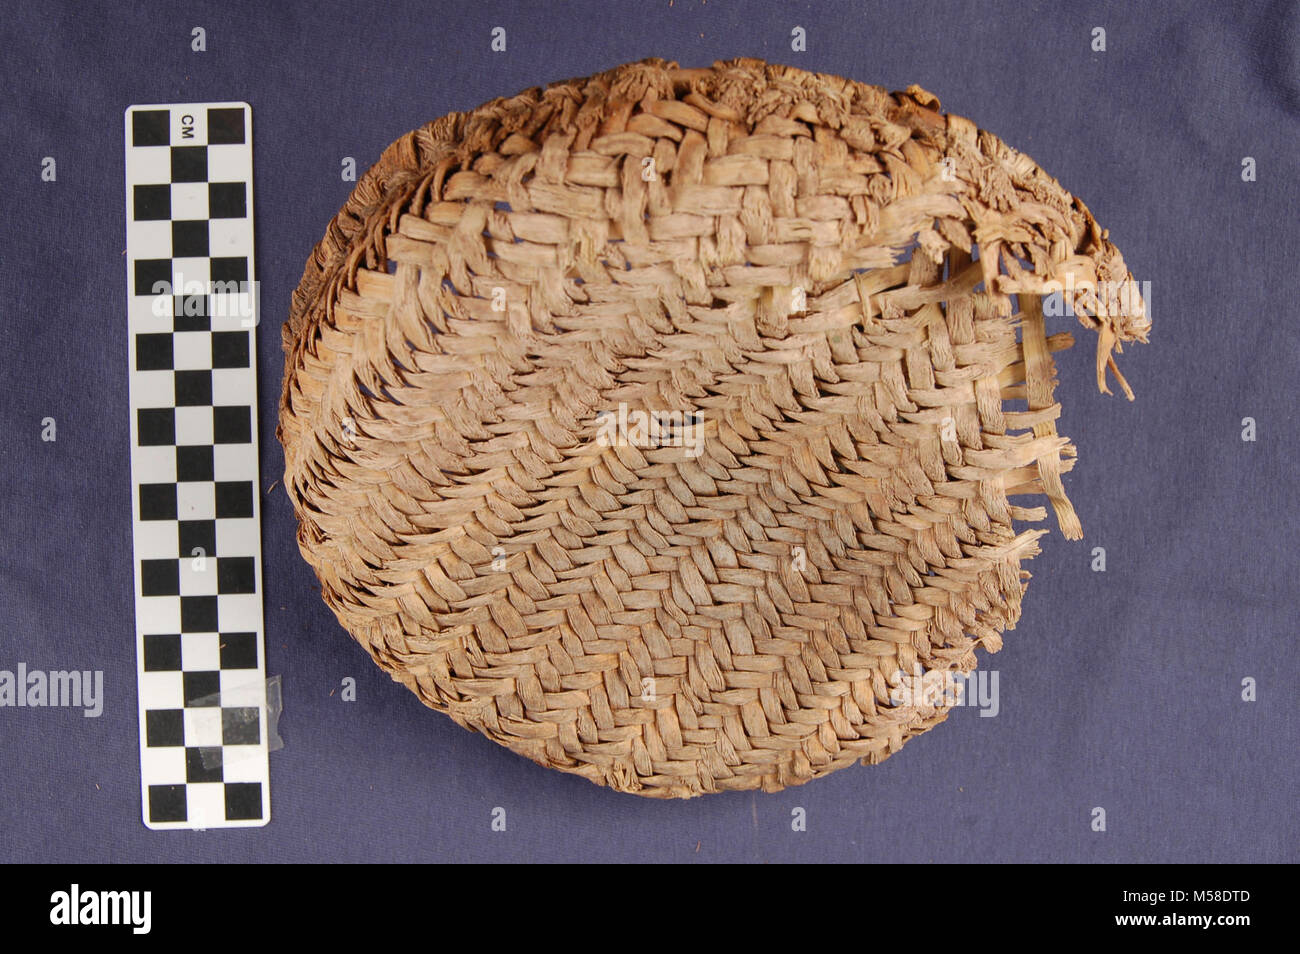 Pueblo III Basket grca  Grand Canyon Nat Park. ONE BASKET, APPROXIMATELY 80% COMPLETE.  IT IS A TWILLED RING BASKET, MANUFACTURED WITH A 3/3 TWILL TECHNIQUE.   BODY OF THE BASKET IS YUCCA OR AGAVE AROUND A SQUAW BUSH (RHUS SPECIES) OR WILLOW (SALIX SP.) HOOP.  RADIOCARBON DATED TO 750 BP +/- 50 YEARS. FOUND ALONG THE COLORADO RIVER, Stock Photo